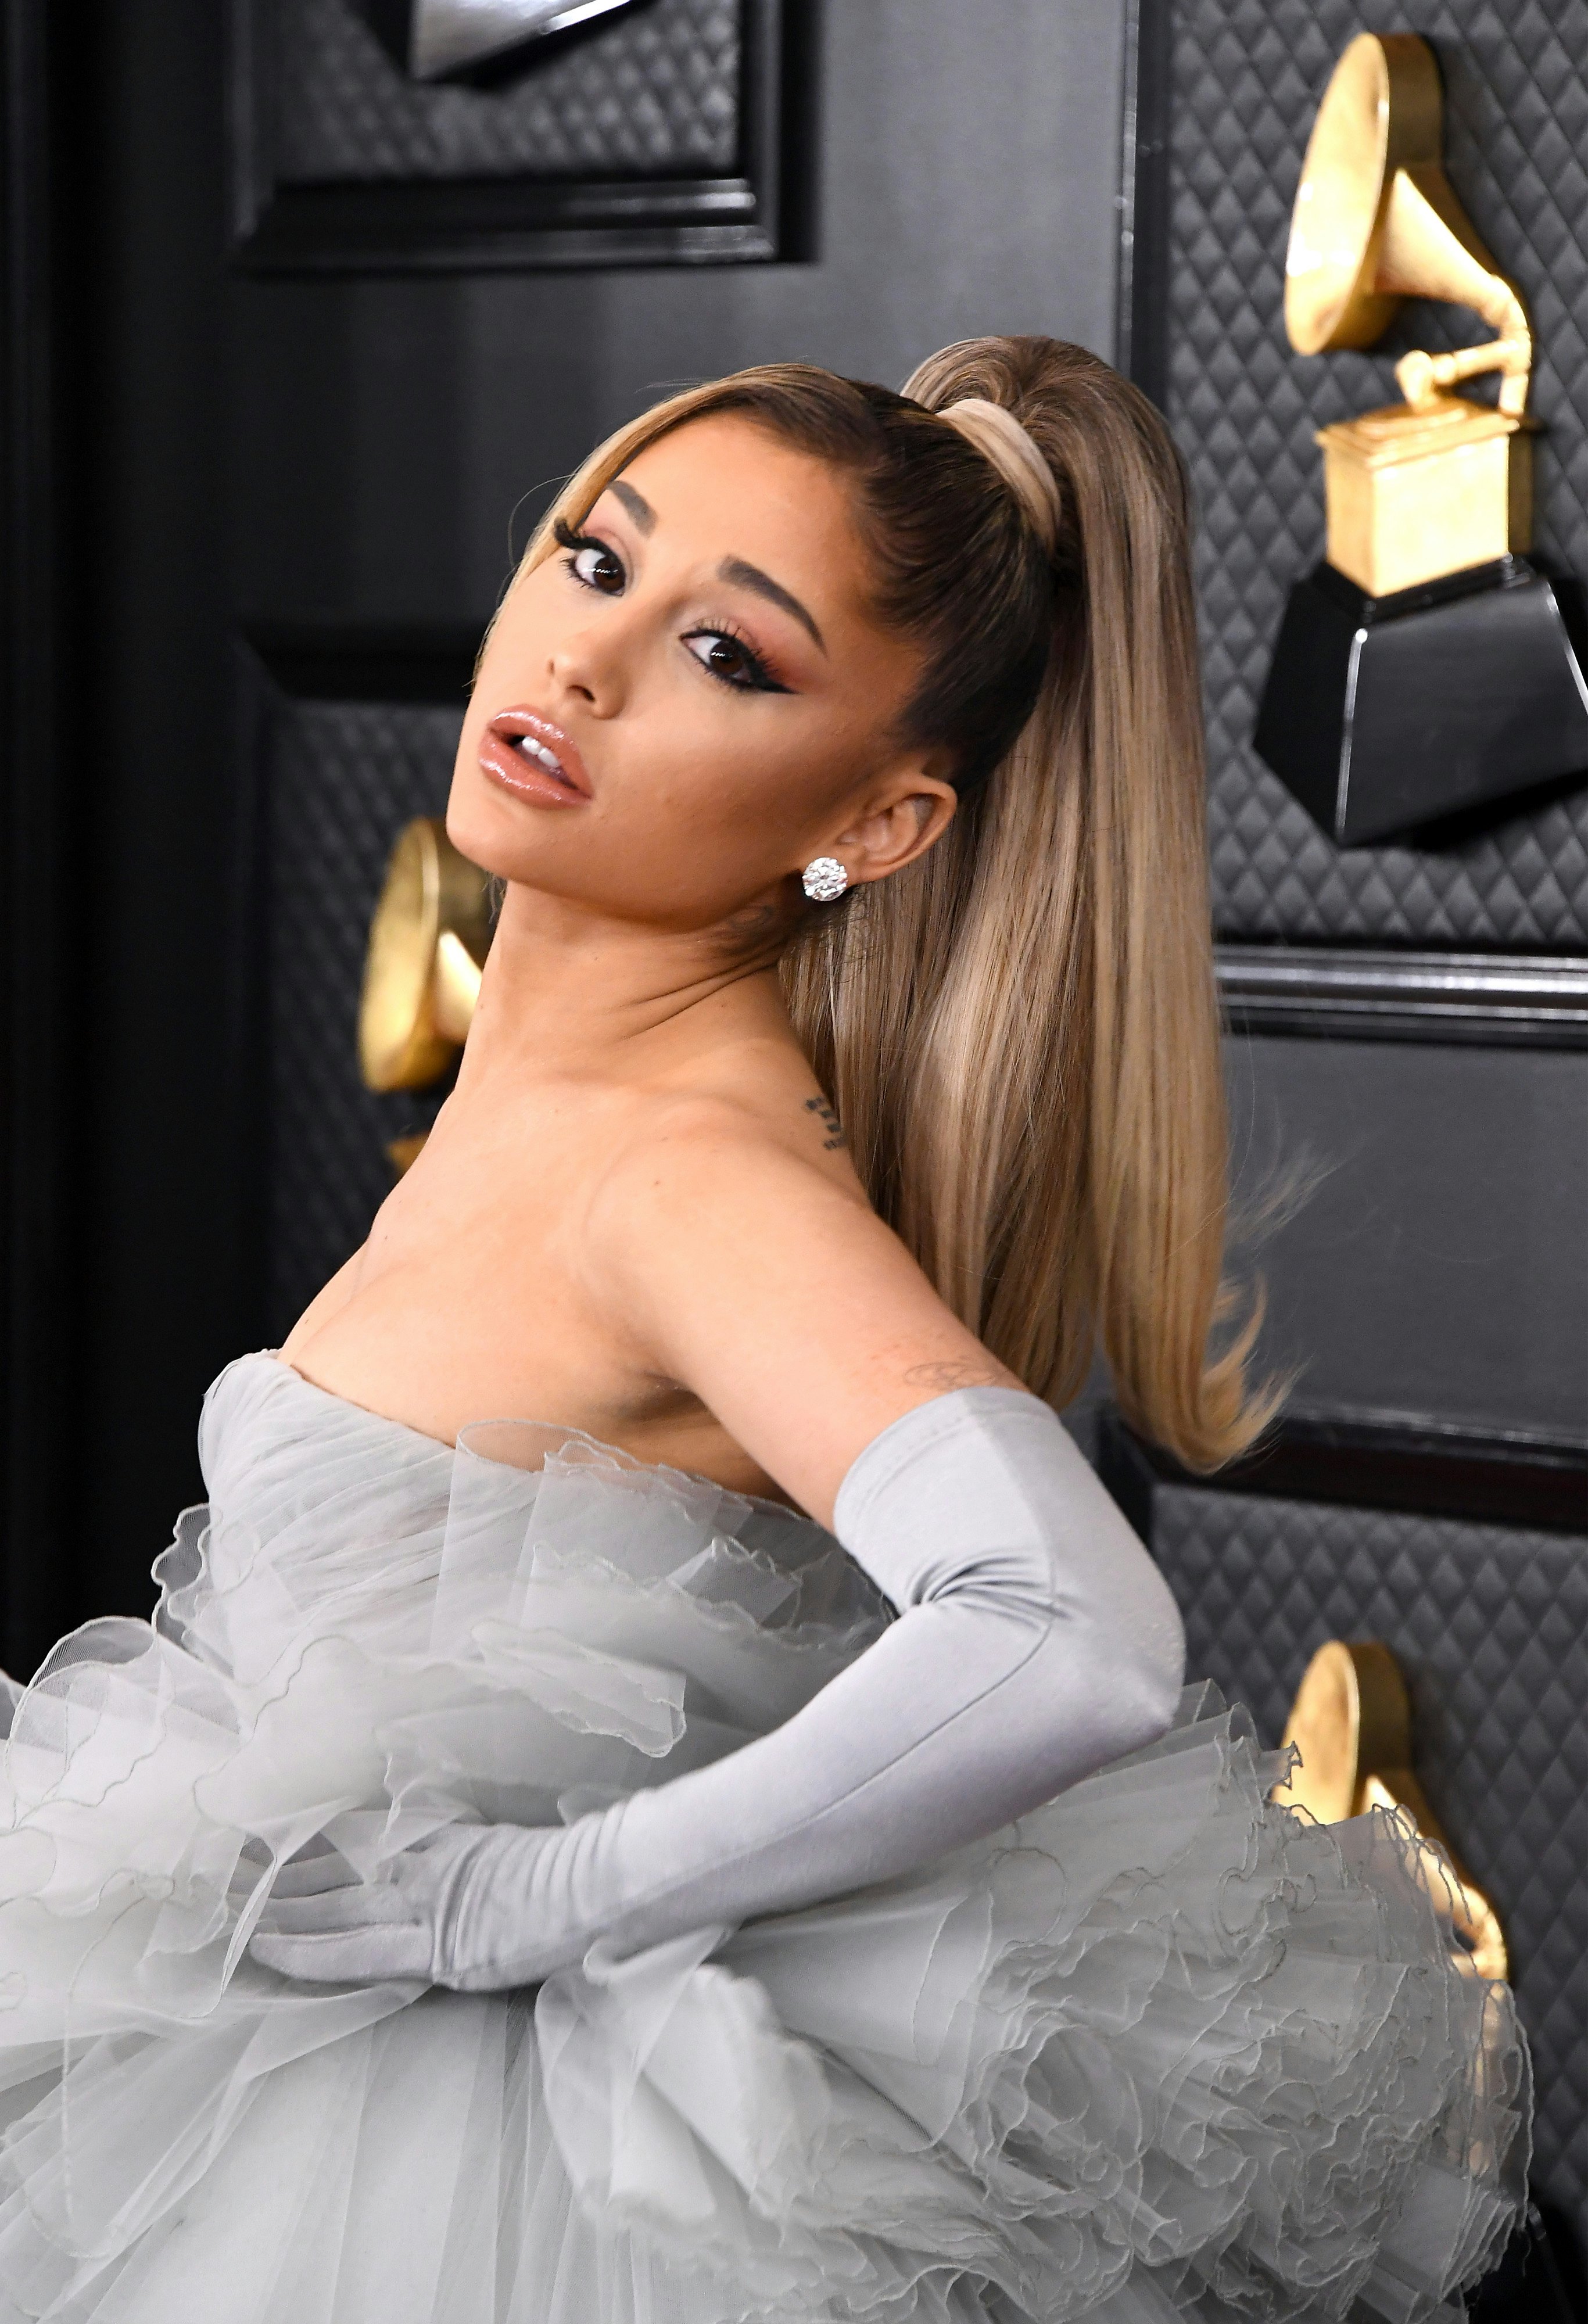 Ariana Grande Worked It in a Red Dress at the 2013 American Music Awards  [RED CARPET PHOTOS]